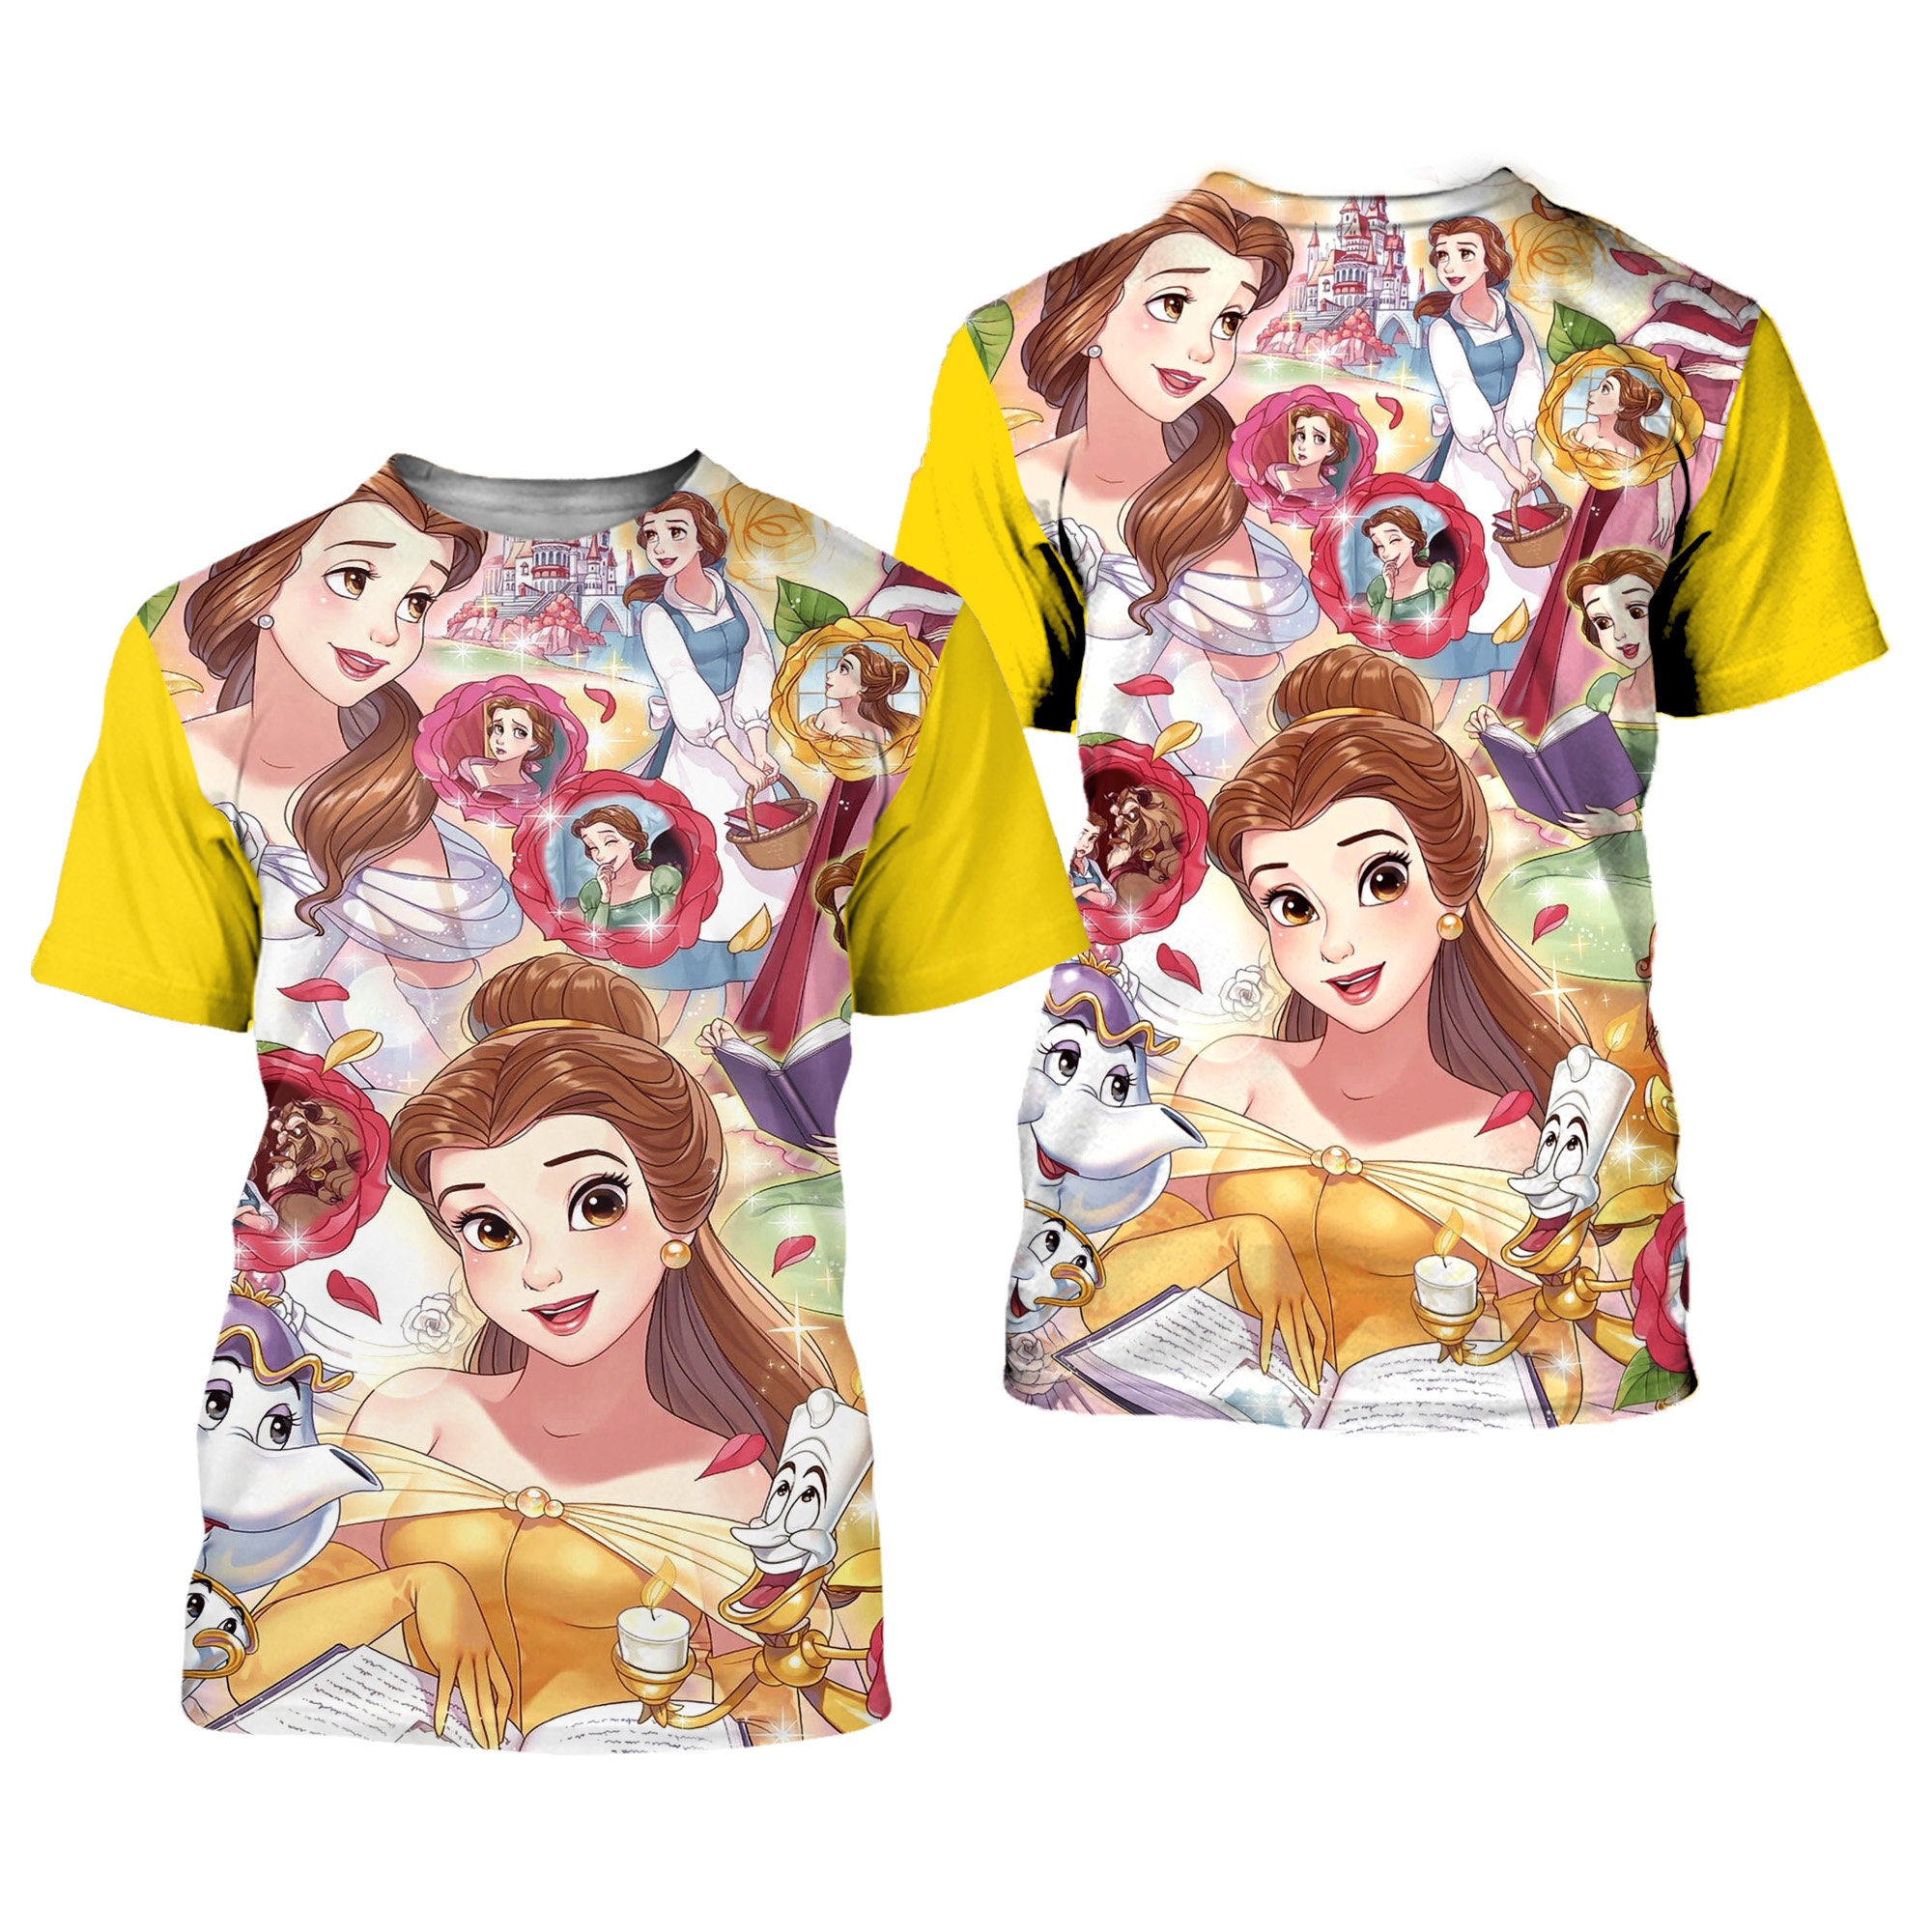 Discover Belle Princess Yellow Button Overalls Patterns Disney 3D T-shirts